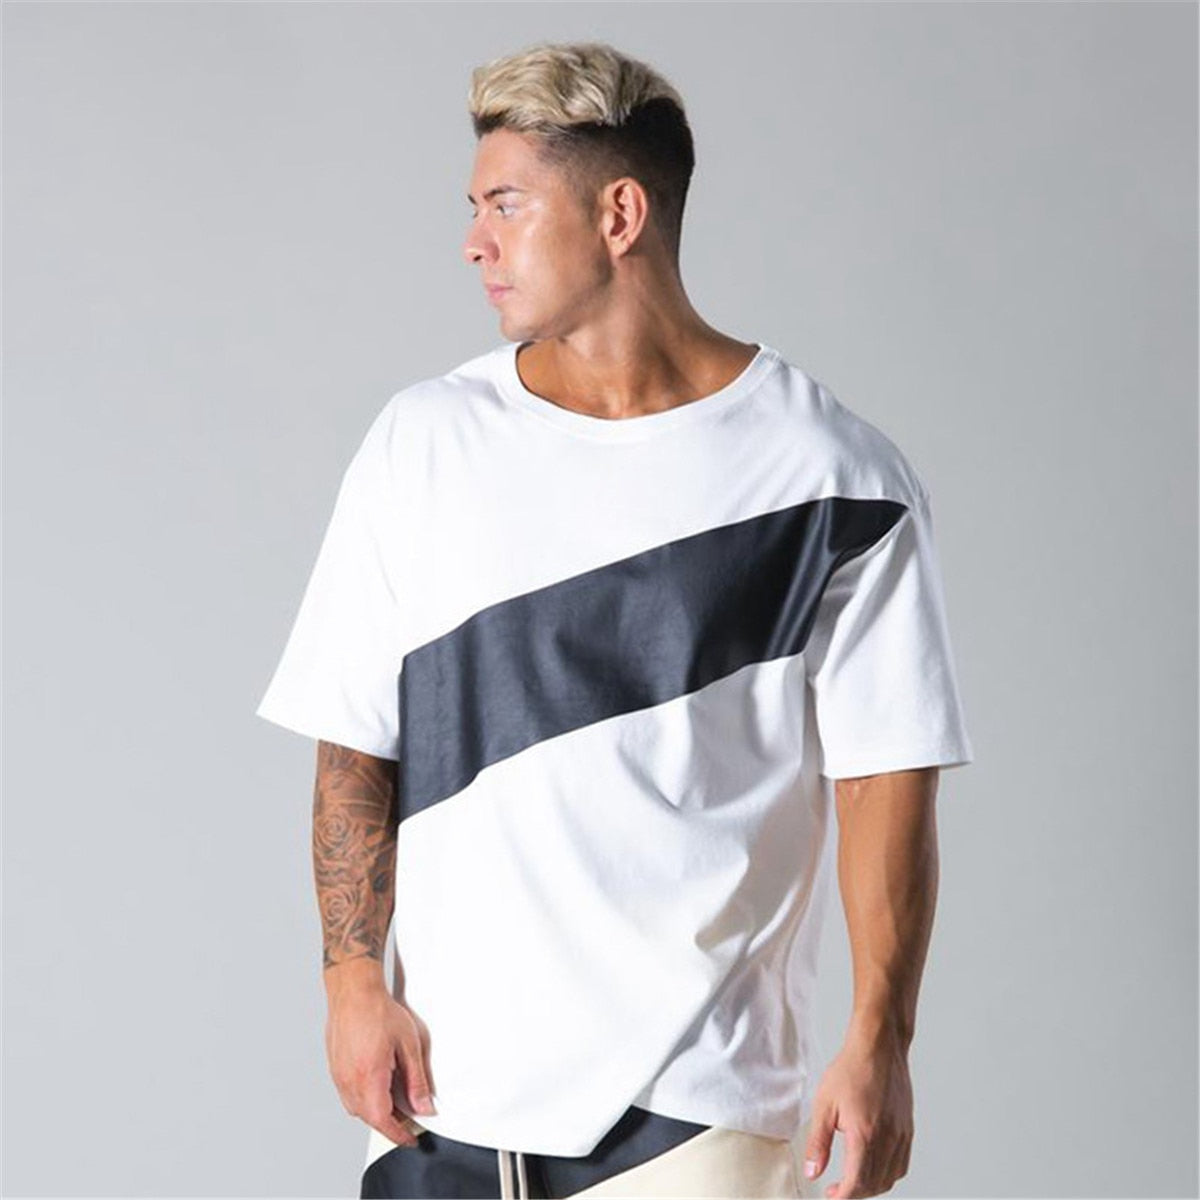 Summer Casual Loose T-shirt Men Cotton Fitness Workout Short Sleeve Shirt Male Gym Sports Tees Tops Fashion Patchwork Clothing